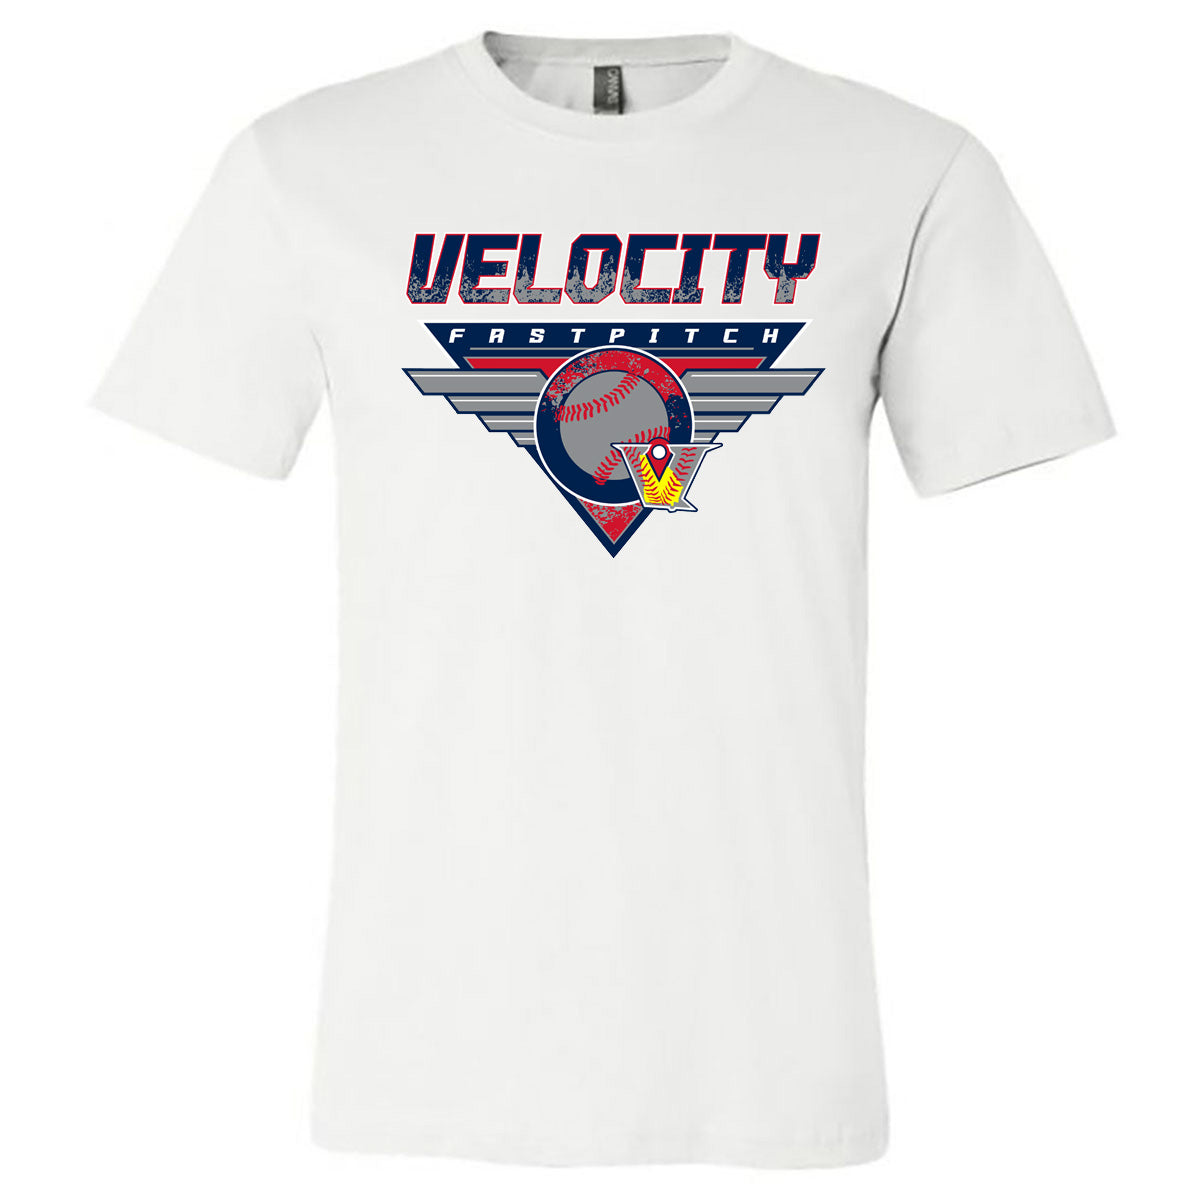 Velo FP - Velocity Fastpitch Triangle - White (Tee/Hoodie/Sweatshirt) - Southern Grace Creations